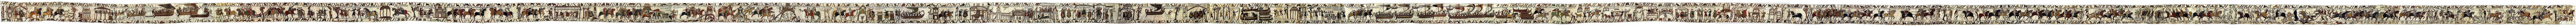 The entire Bayeux Tapestry